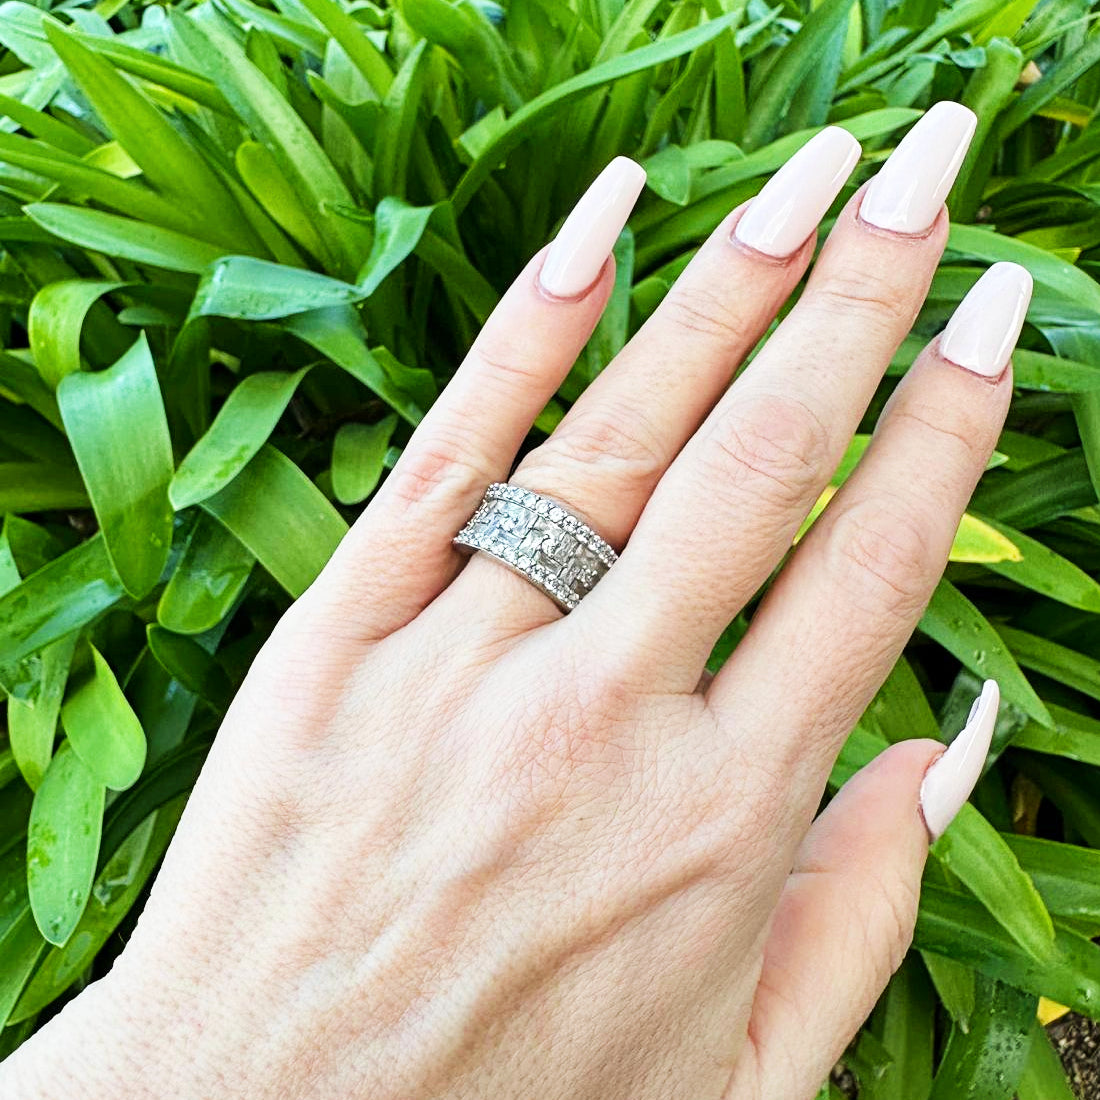 "A Touch of Santuri" Ring in 925 Sterling Silver with Cubic Zirconia Stones in a geometric design. Bellagio & Co Jewellery. Worldwide shipping from Australia